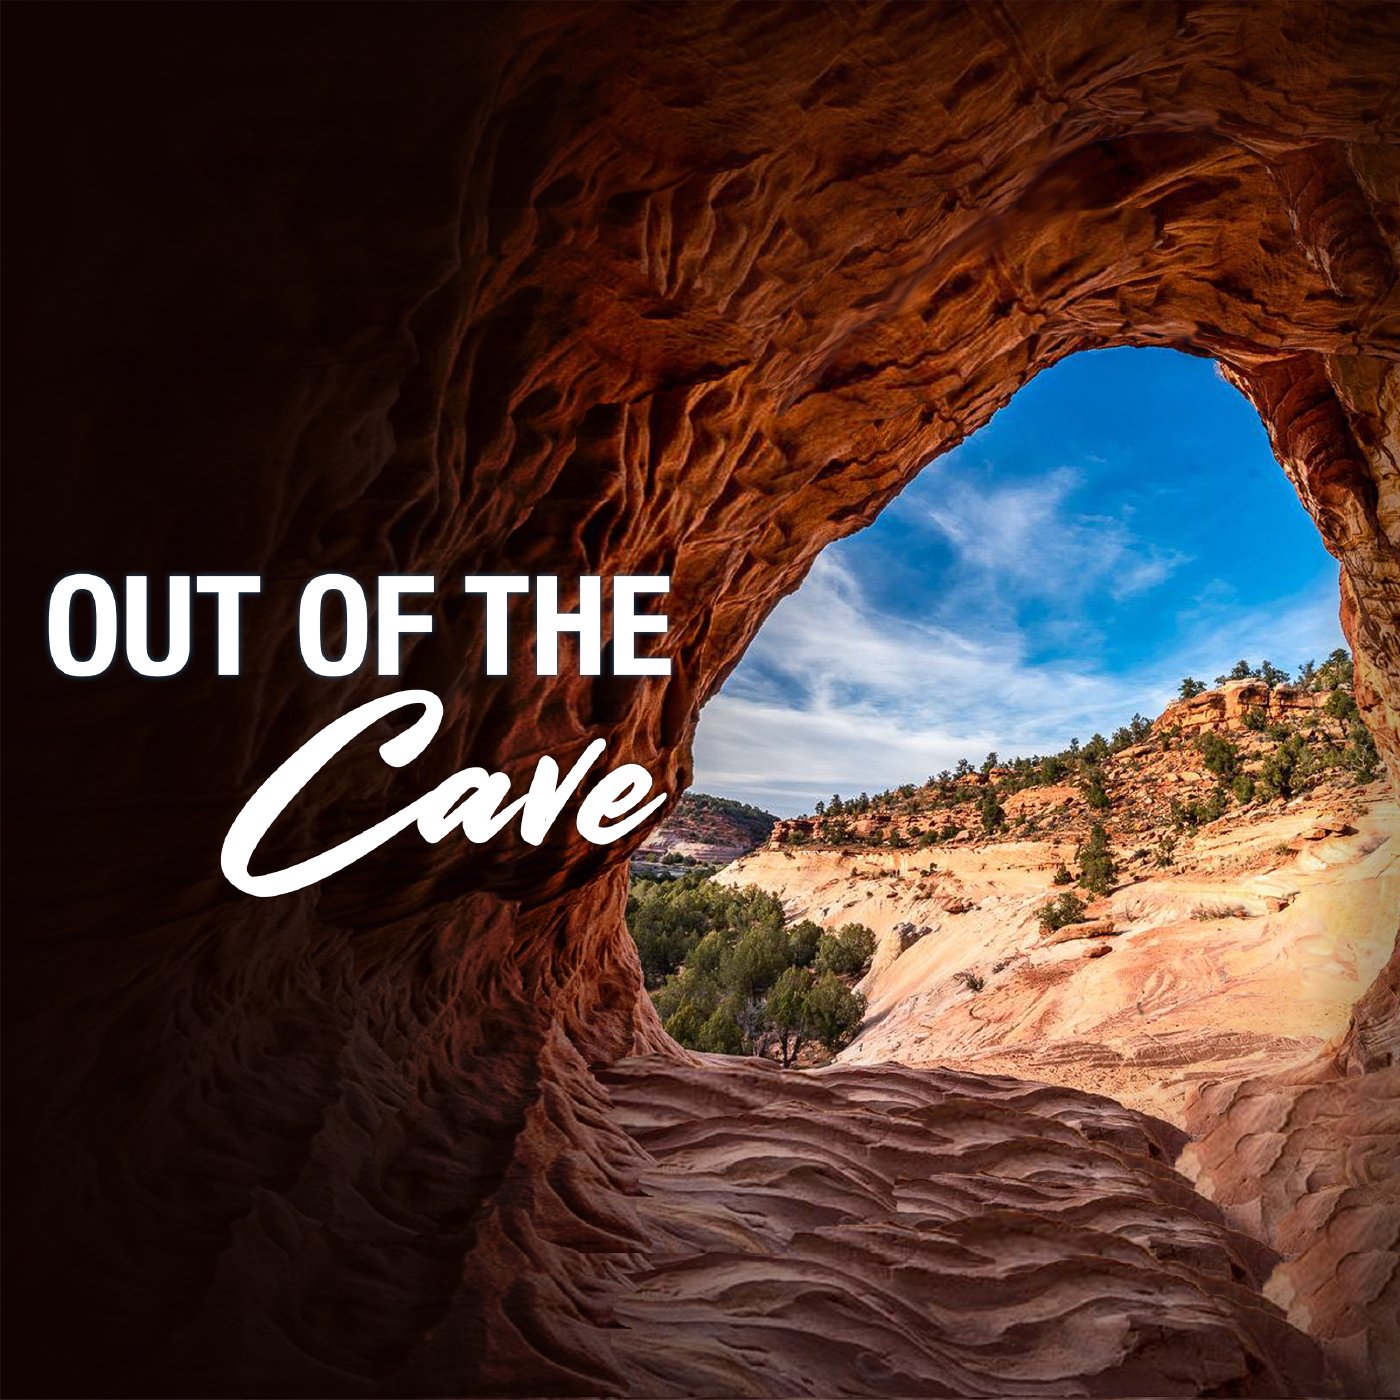 Out of the Cave